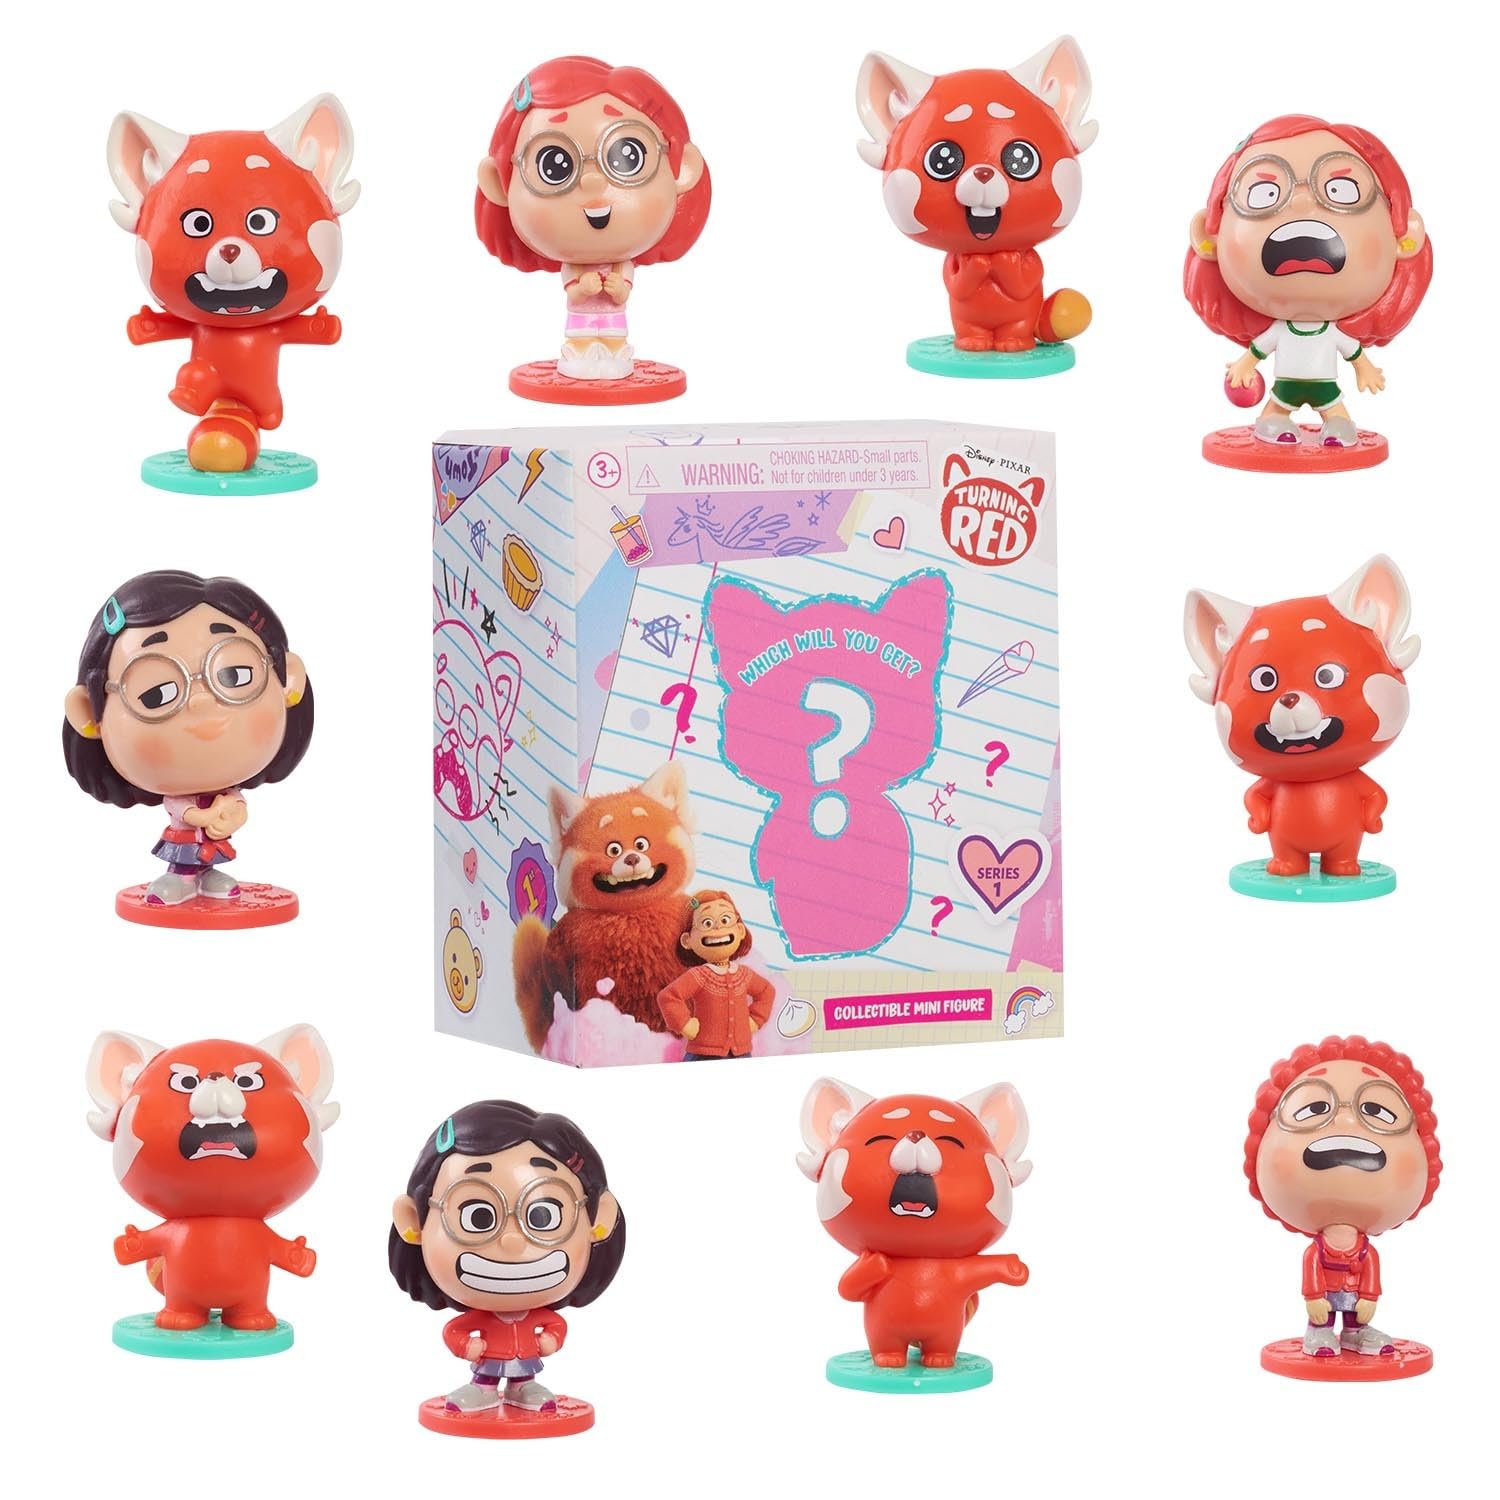 3-Pack Just Play Disney and Pixar Blind Bag Collectible 2.25" Turning Red Figures $3.39 + Free Shipping w/ Prime or on $25+